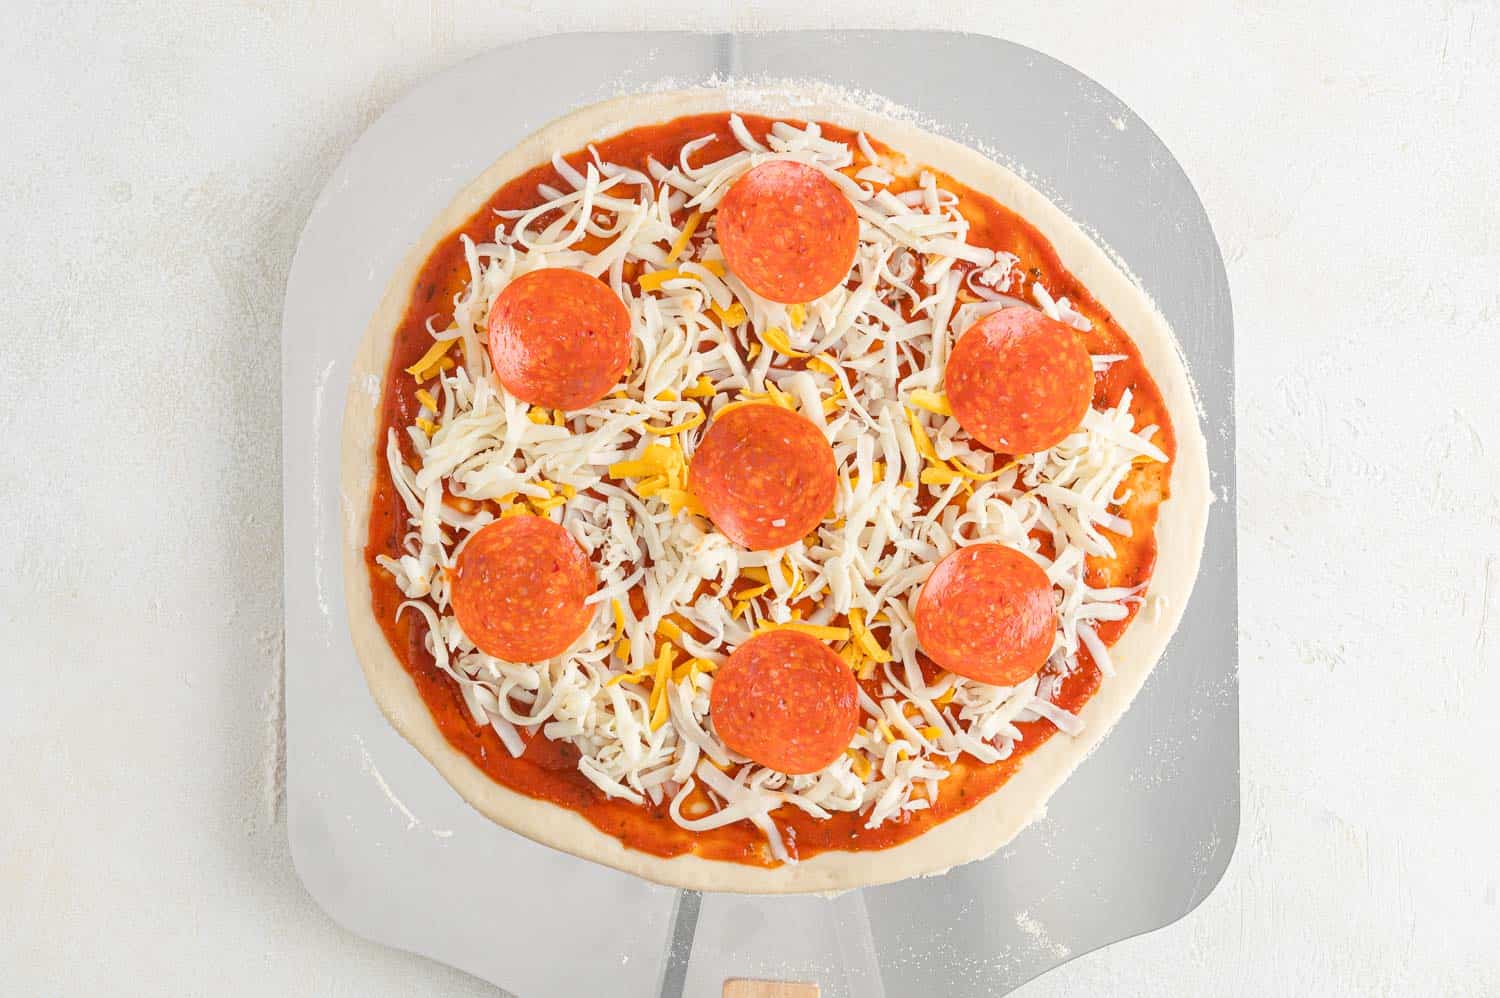 Unbaked pizza.